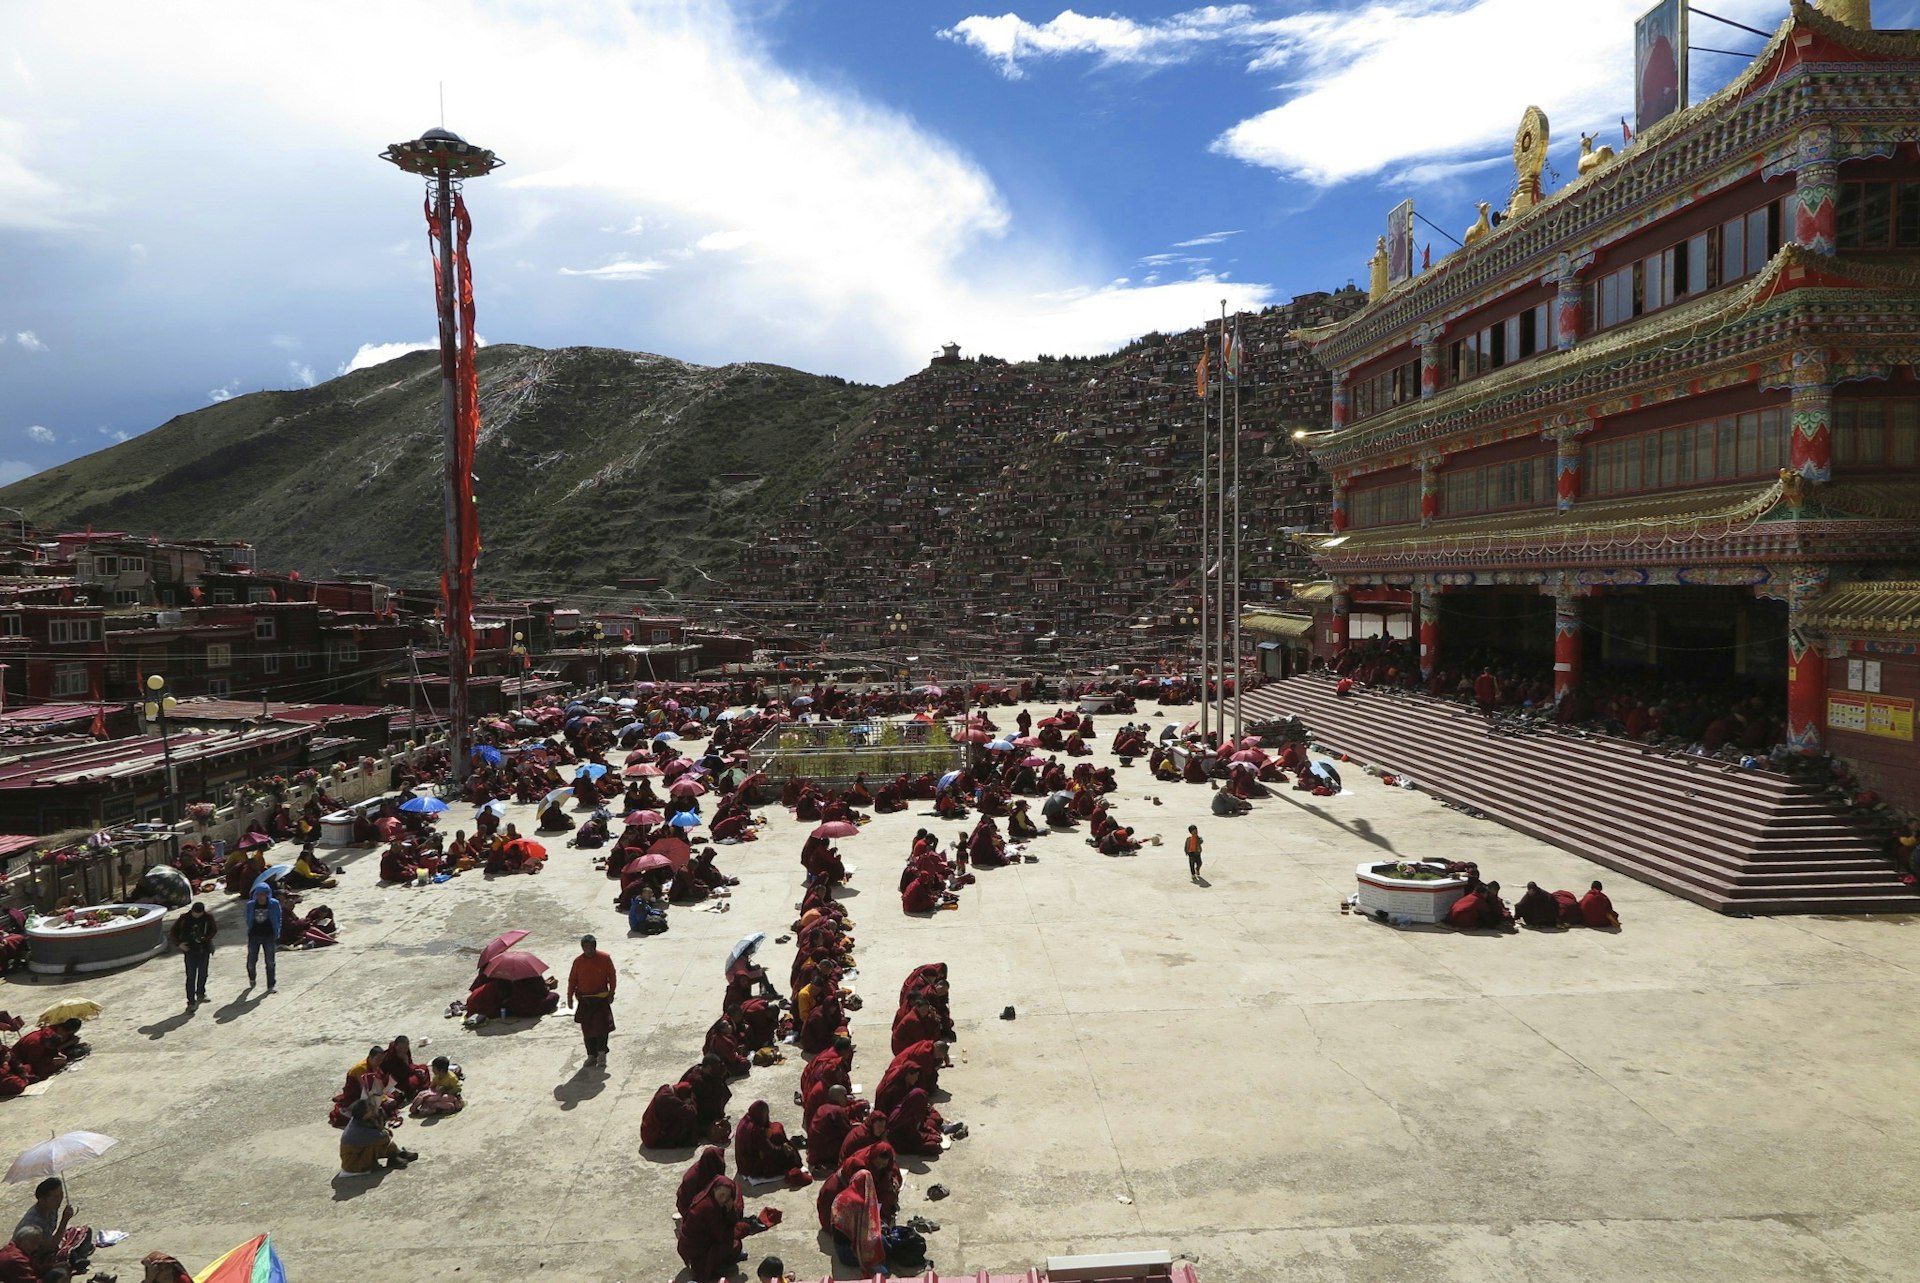 Seda Nunnery, Sichuan, China. Image by Tienlon Ho / Lonely Planet